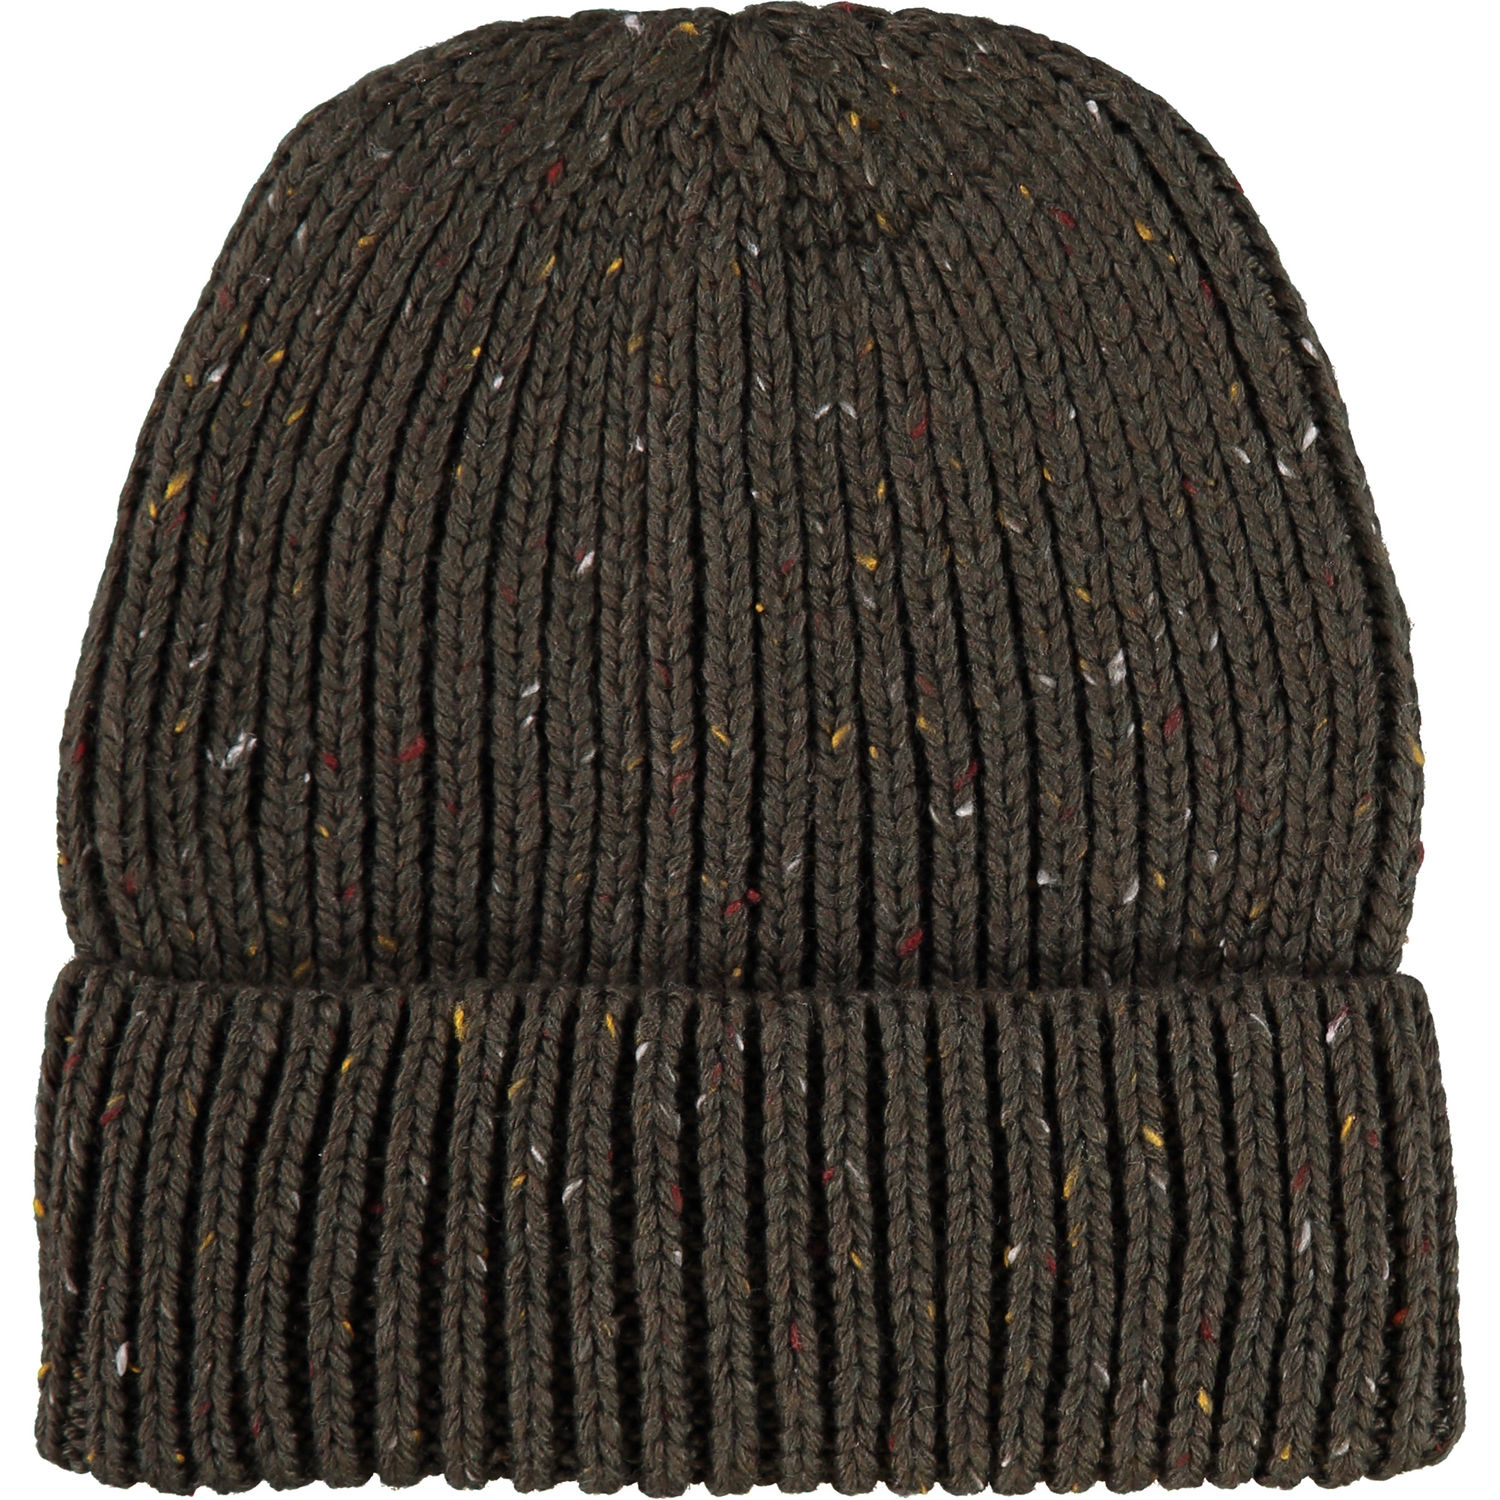 FRENCH CONNECTION Olive Heather Beanie Hat